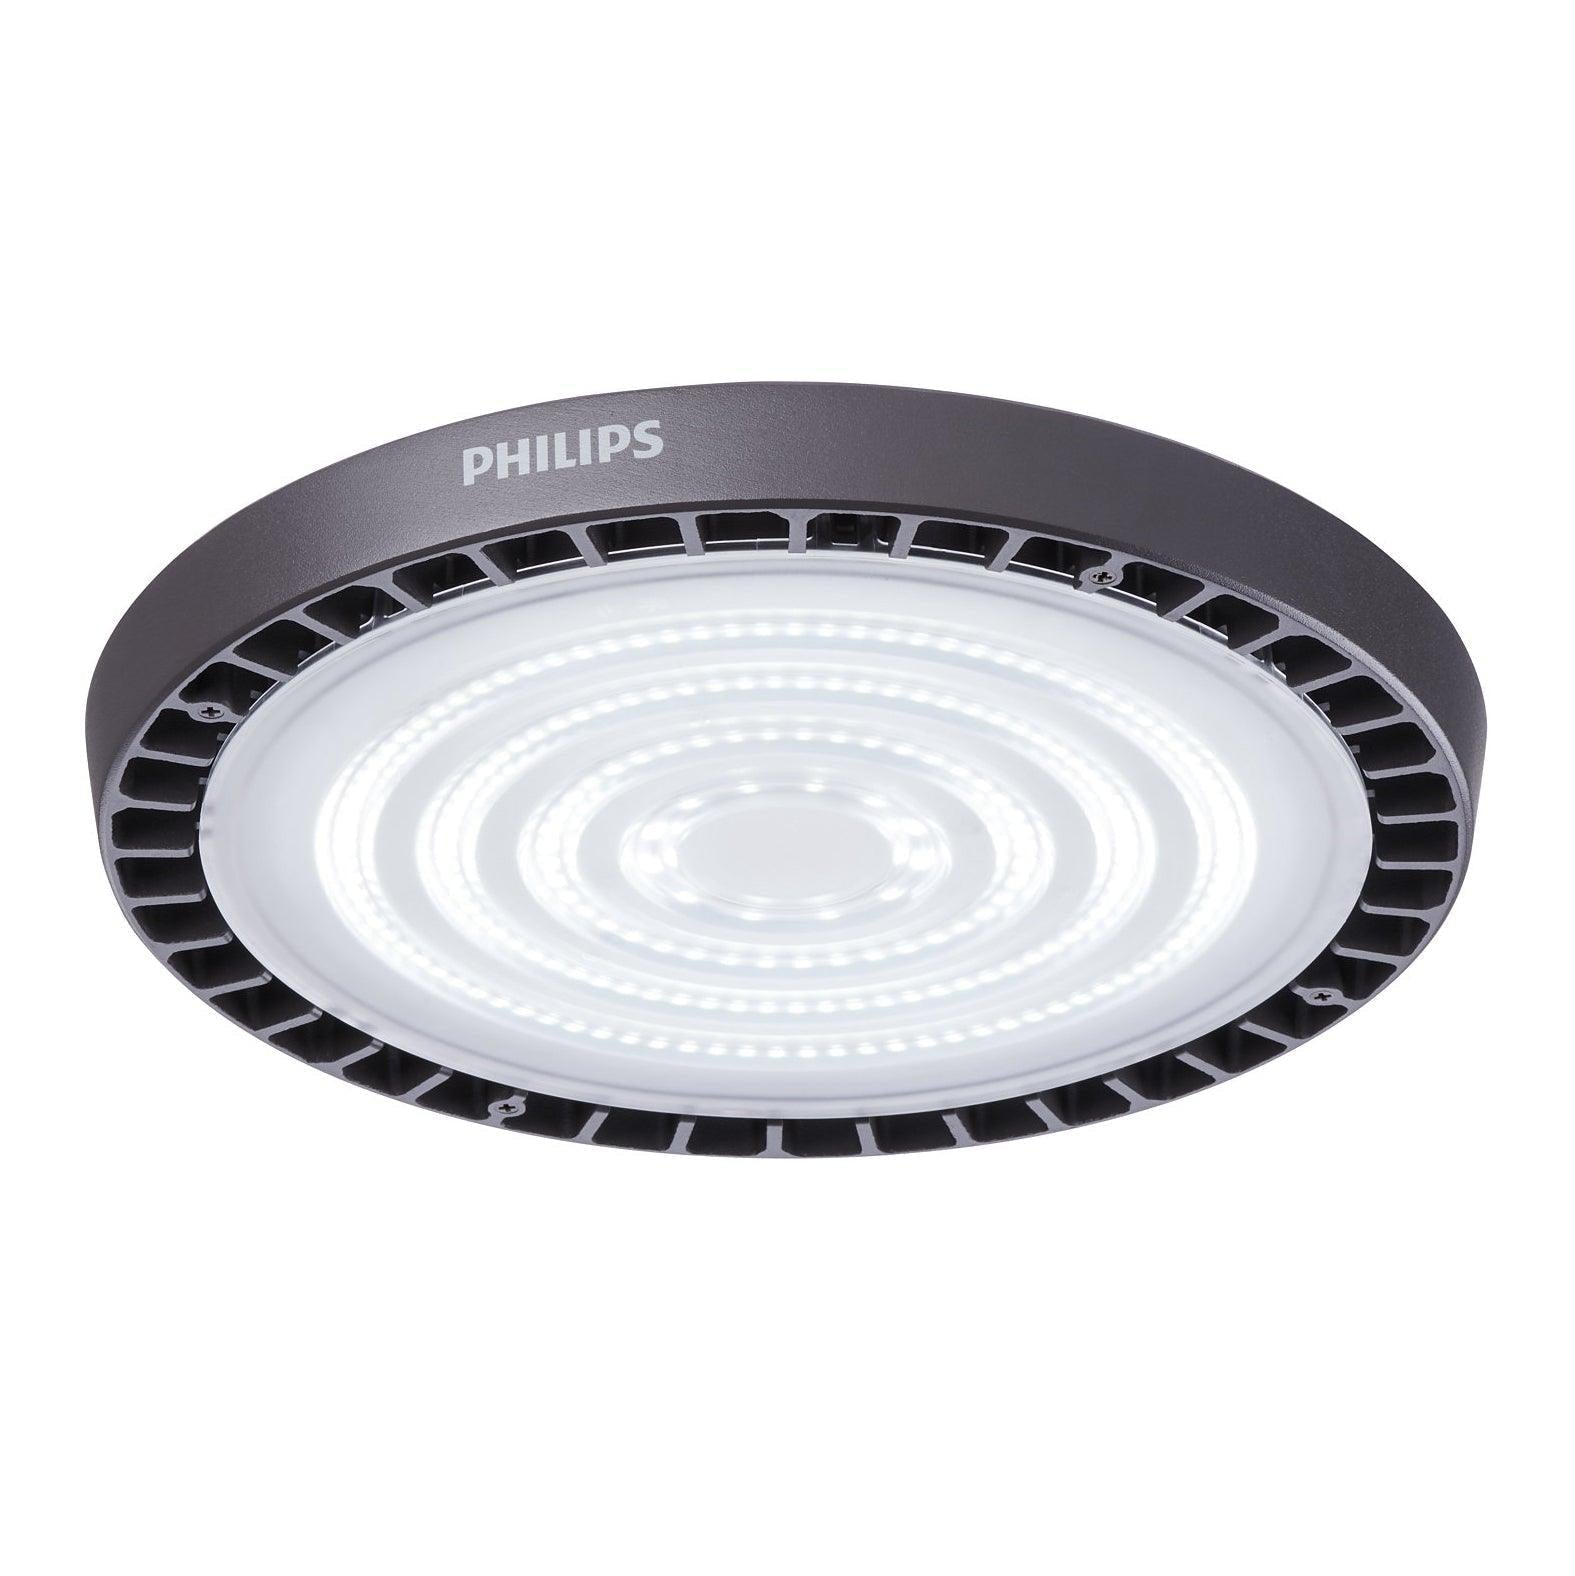 192w Philips GreenPerform LED Highbay G4, 26500lm (135lm/w), 3 Year Warranty, IP65, Gold-RS Range - Clear Sky Distributers  (7558415188155)